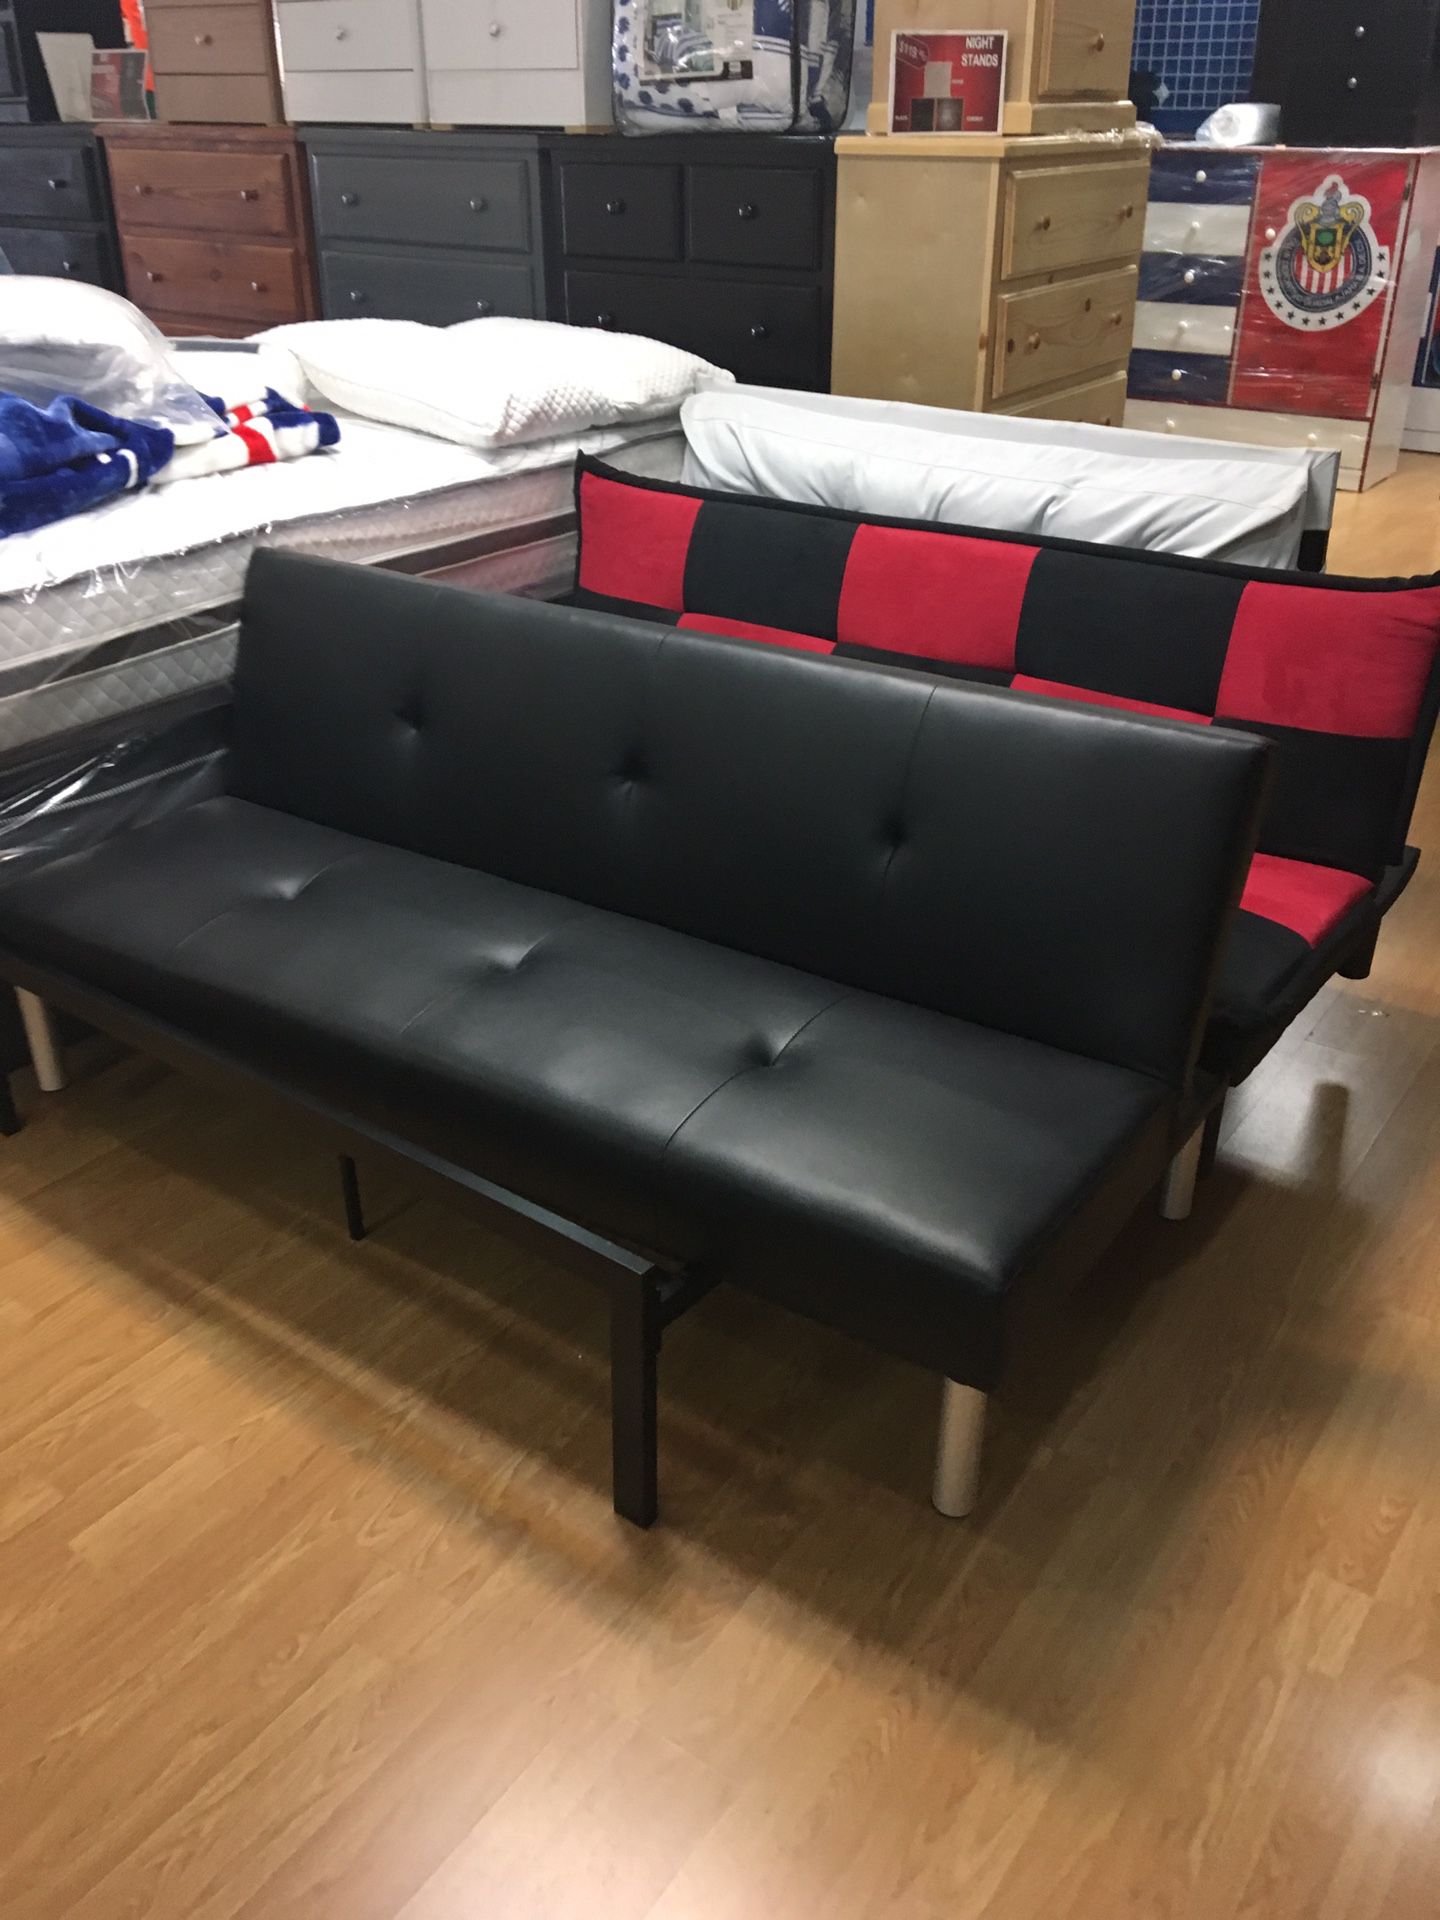 New futon bed leather